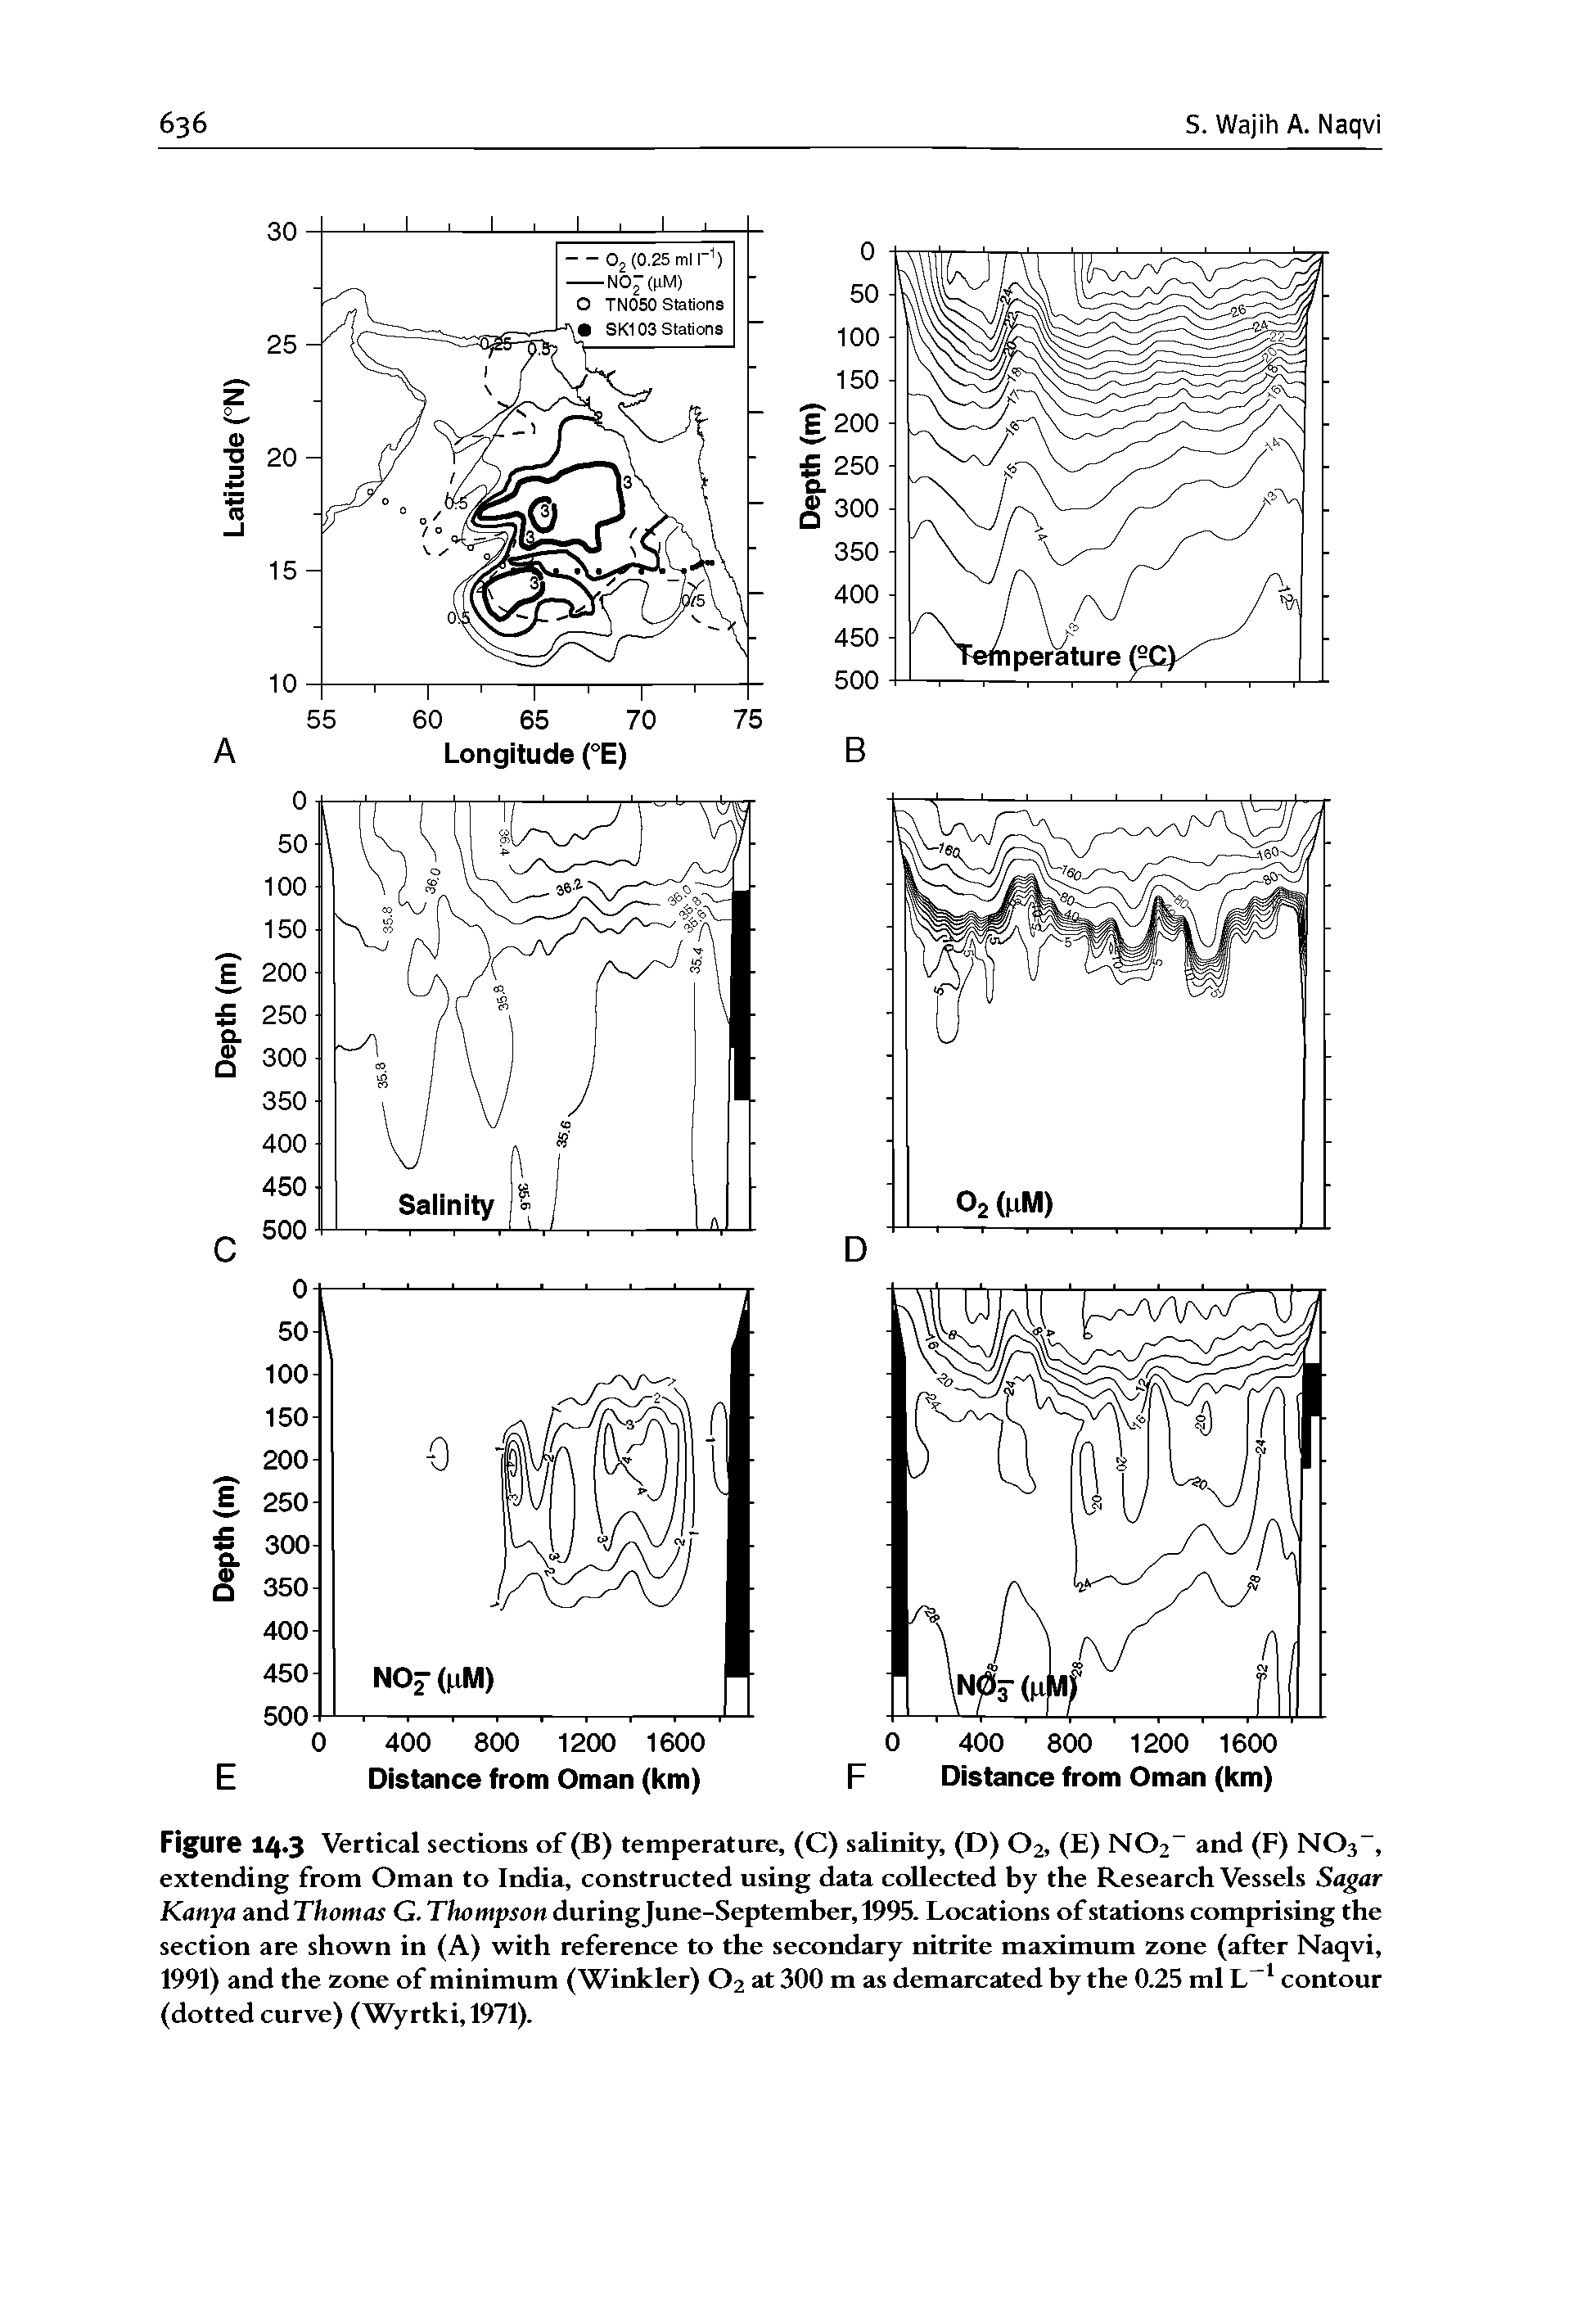 Figure 14.3 Vertical sections of (B) temperature, (C) salinity, (D) O2, (E) N02 and (F) NOs", extending from Oman to India, constructed using data collected by the Research Vessels Sagar Kanya andThomas G. Thompson during June-September, 1995. Locations of stations comprising the section are shown in (A) with reference to the secondary nitrite maximum zone (after Naqvi, 1991) and the zone of minimum (Winkler) O2 at 300 m as demarcated by the 0.25 ml L contour (dotted curve) (Wyrtki,1971).